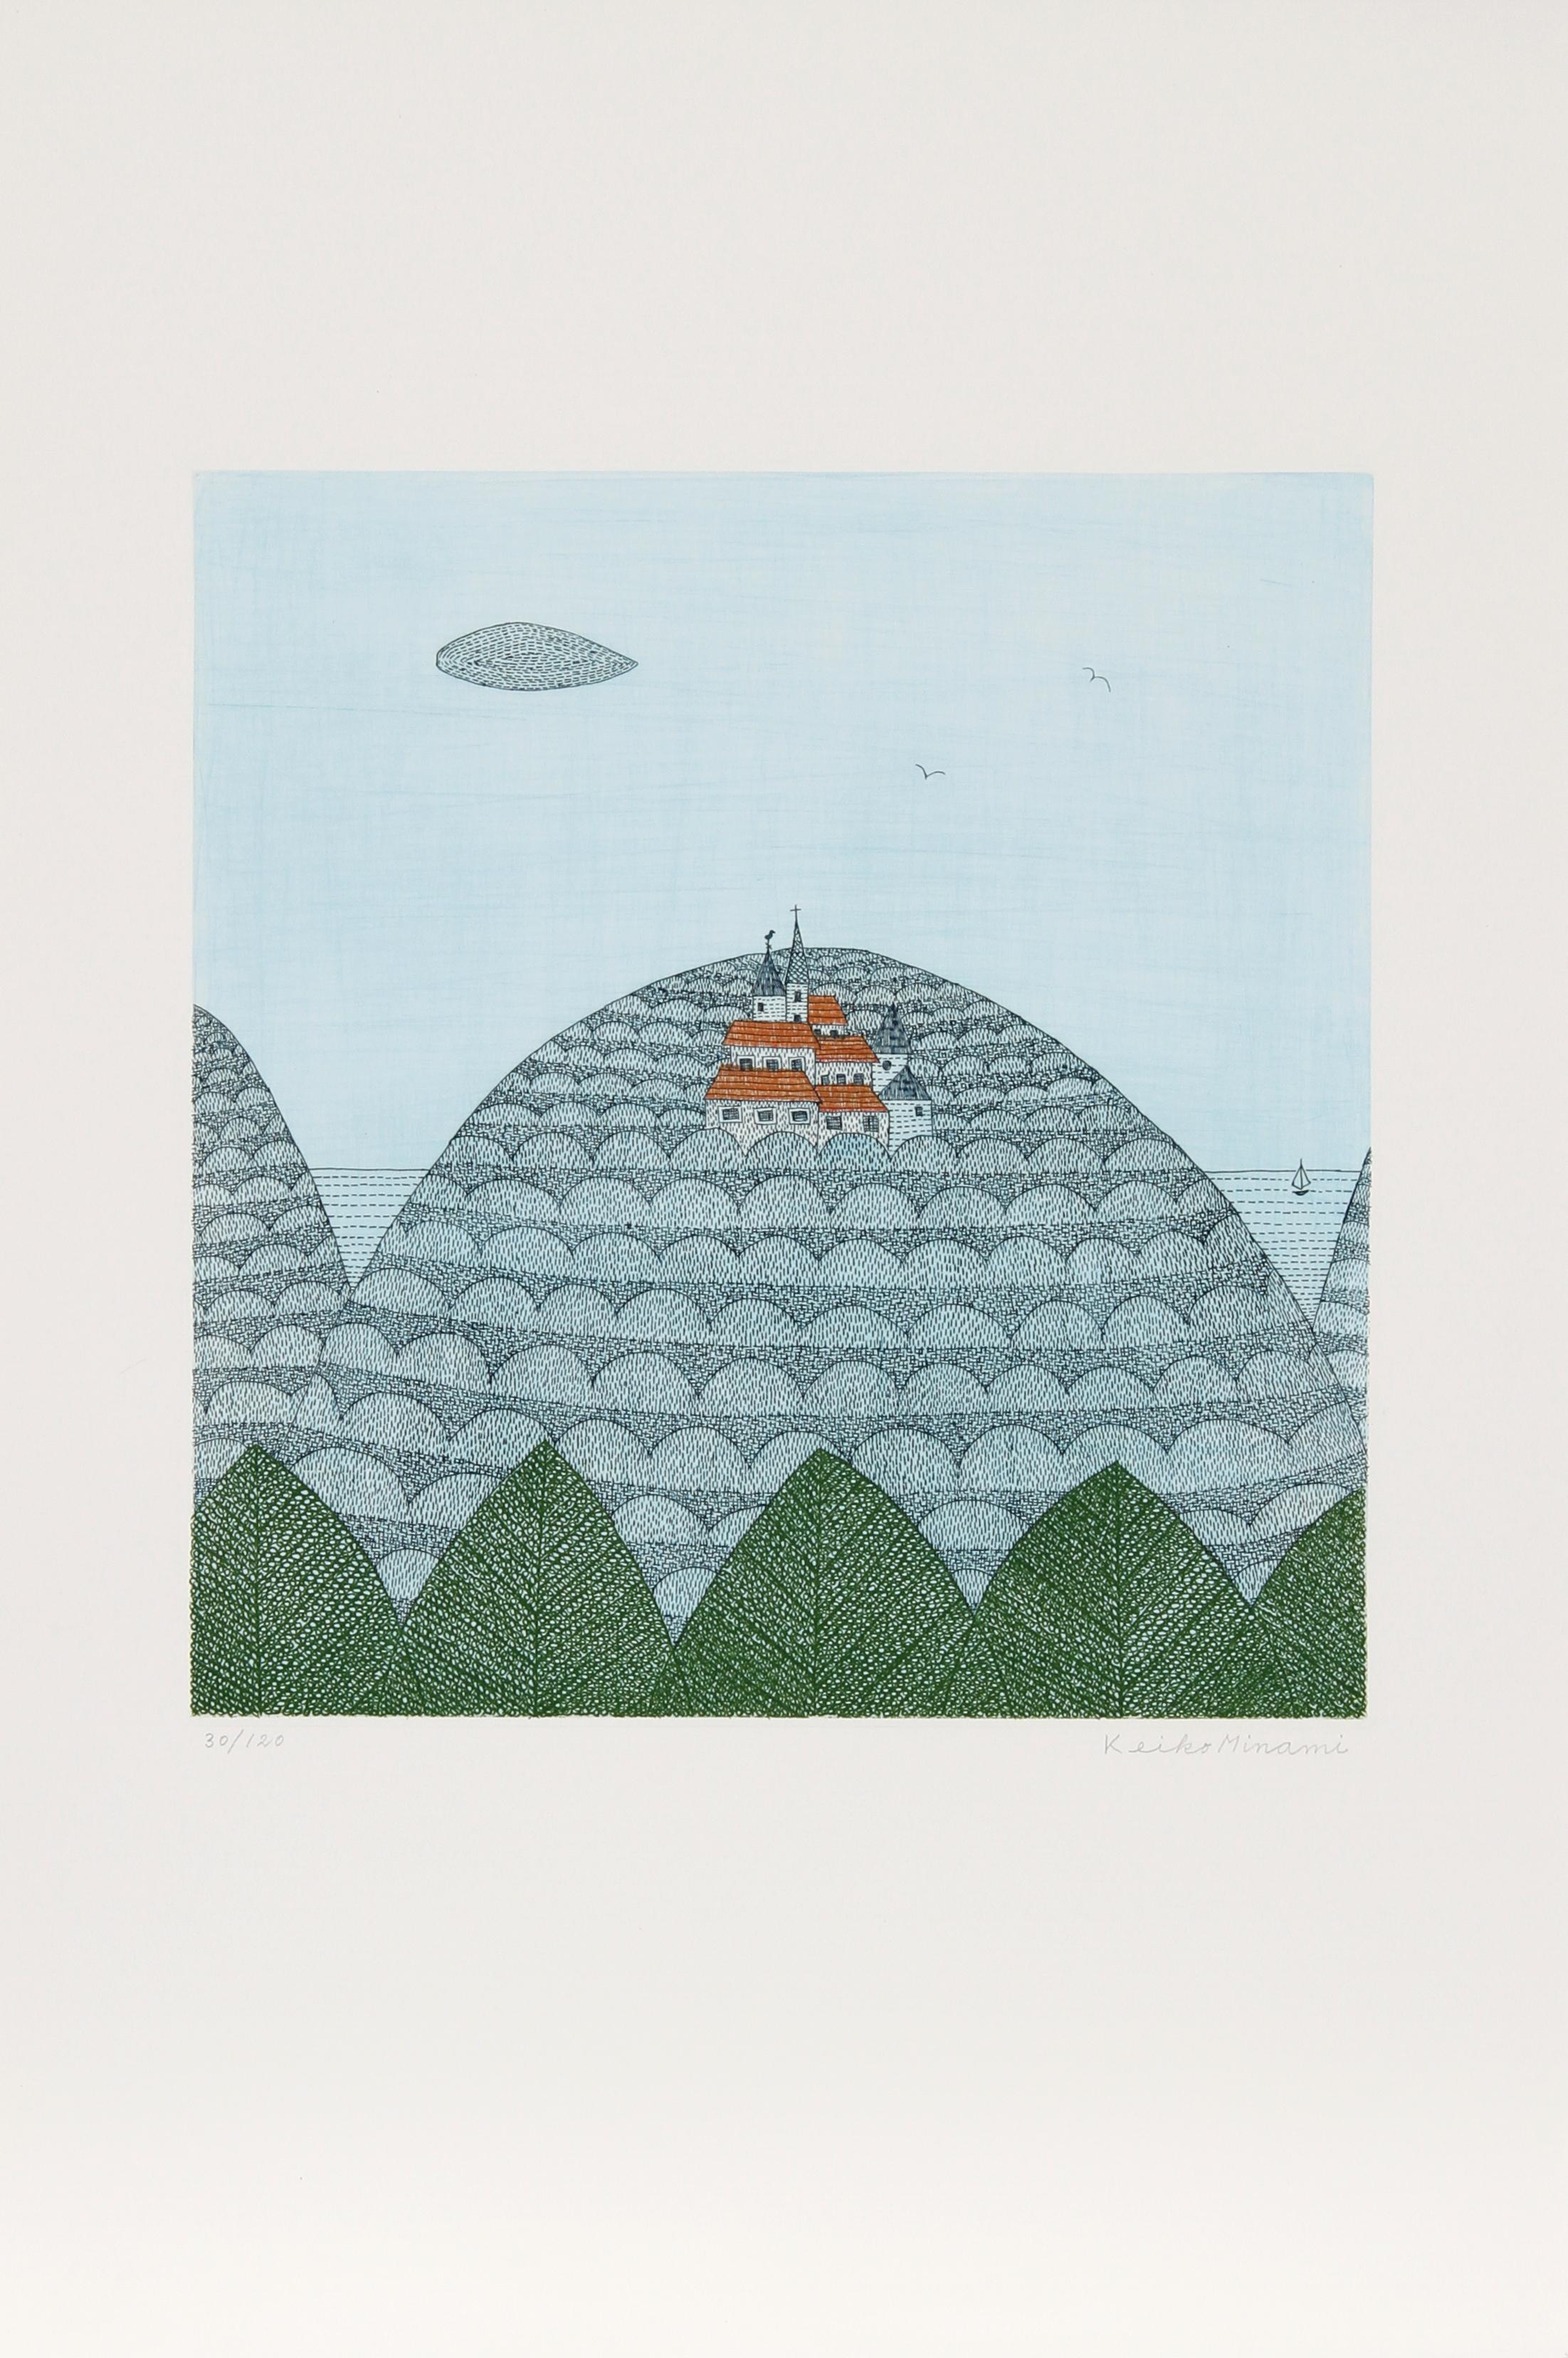 Artist: Keiko Minami, Japanese (1911 - 2004)
Title: Castle
Year: circa 1985
Medium: Aquatint Etching, Signed and numbered in pencil
Edition: 120
Image Size: 12 x 11 inches 
Size: 22 in. x 15 in. (55.88 cm x 38.1 cm)